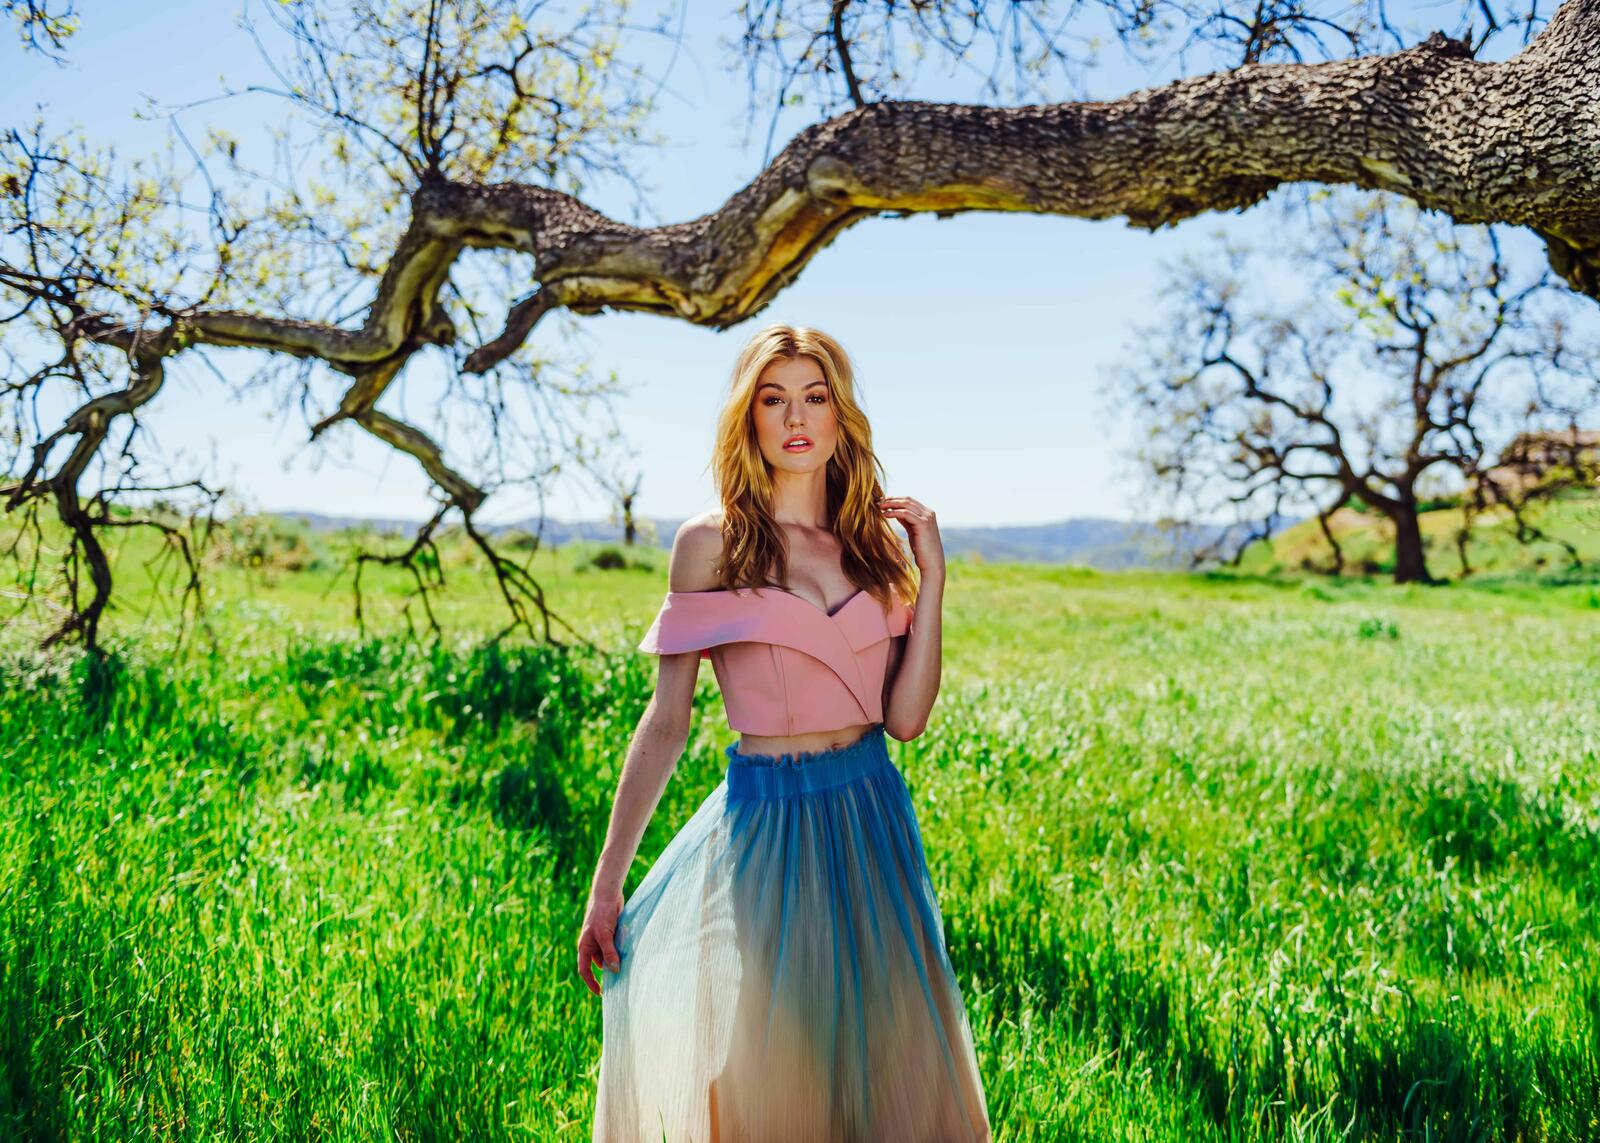 Free photo A girl in a light skirt against a green field